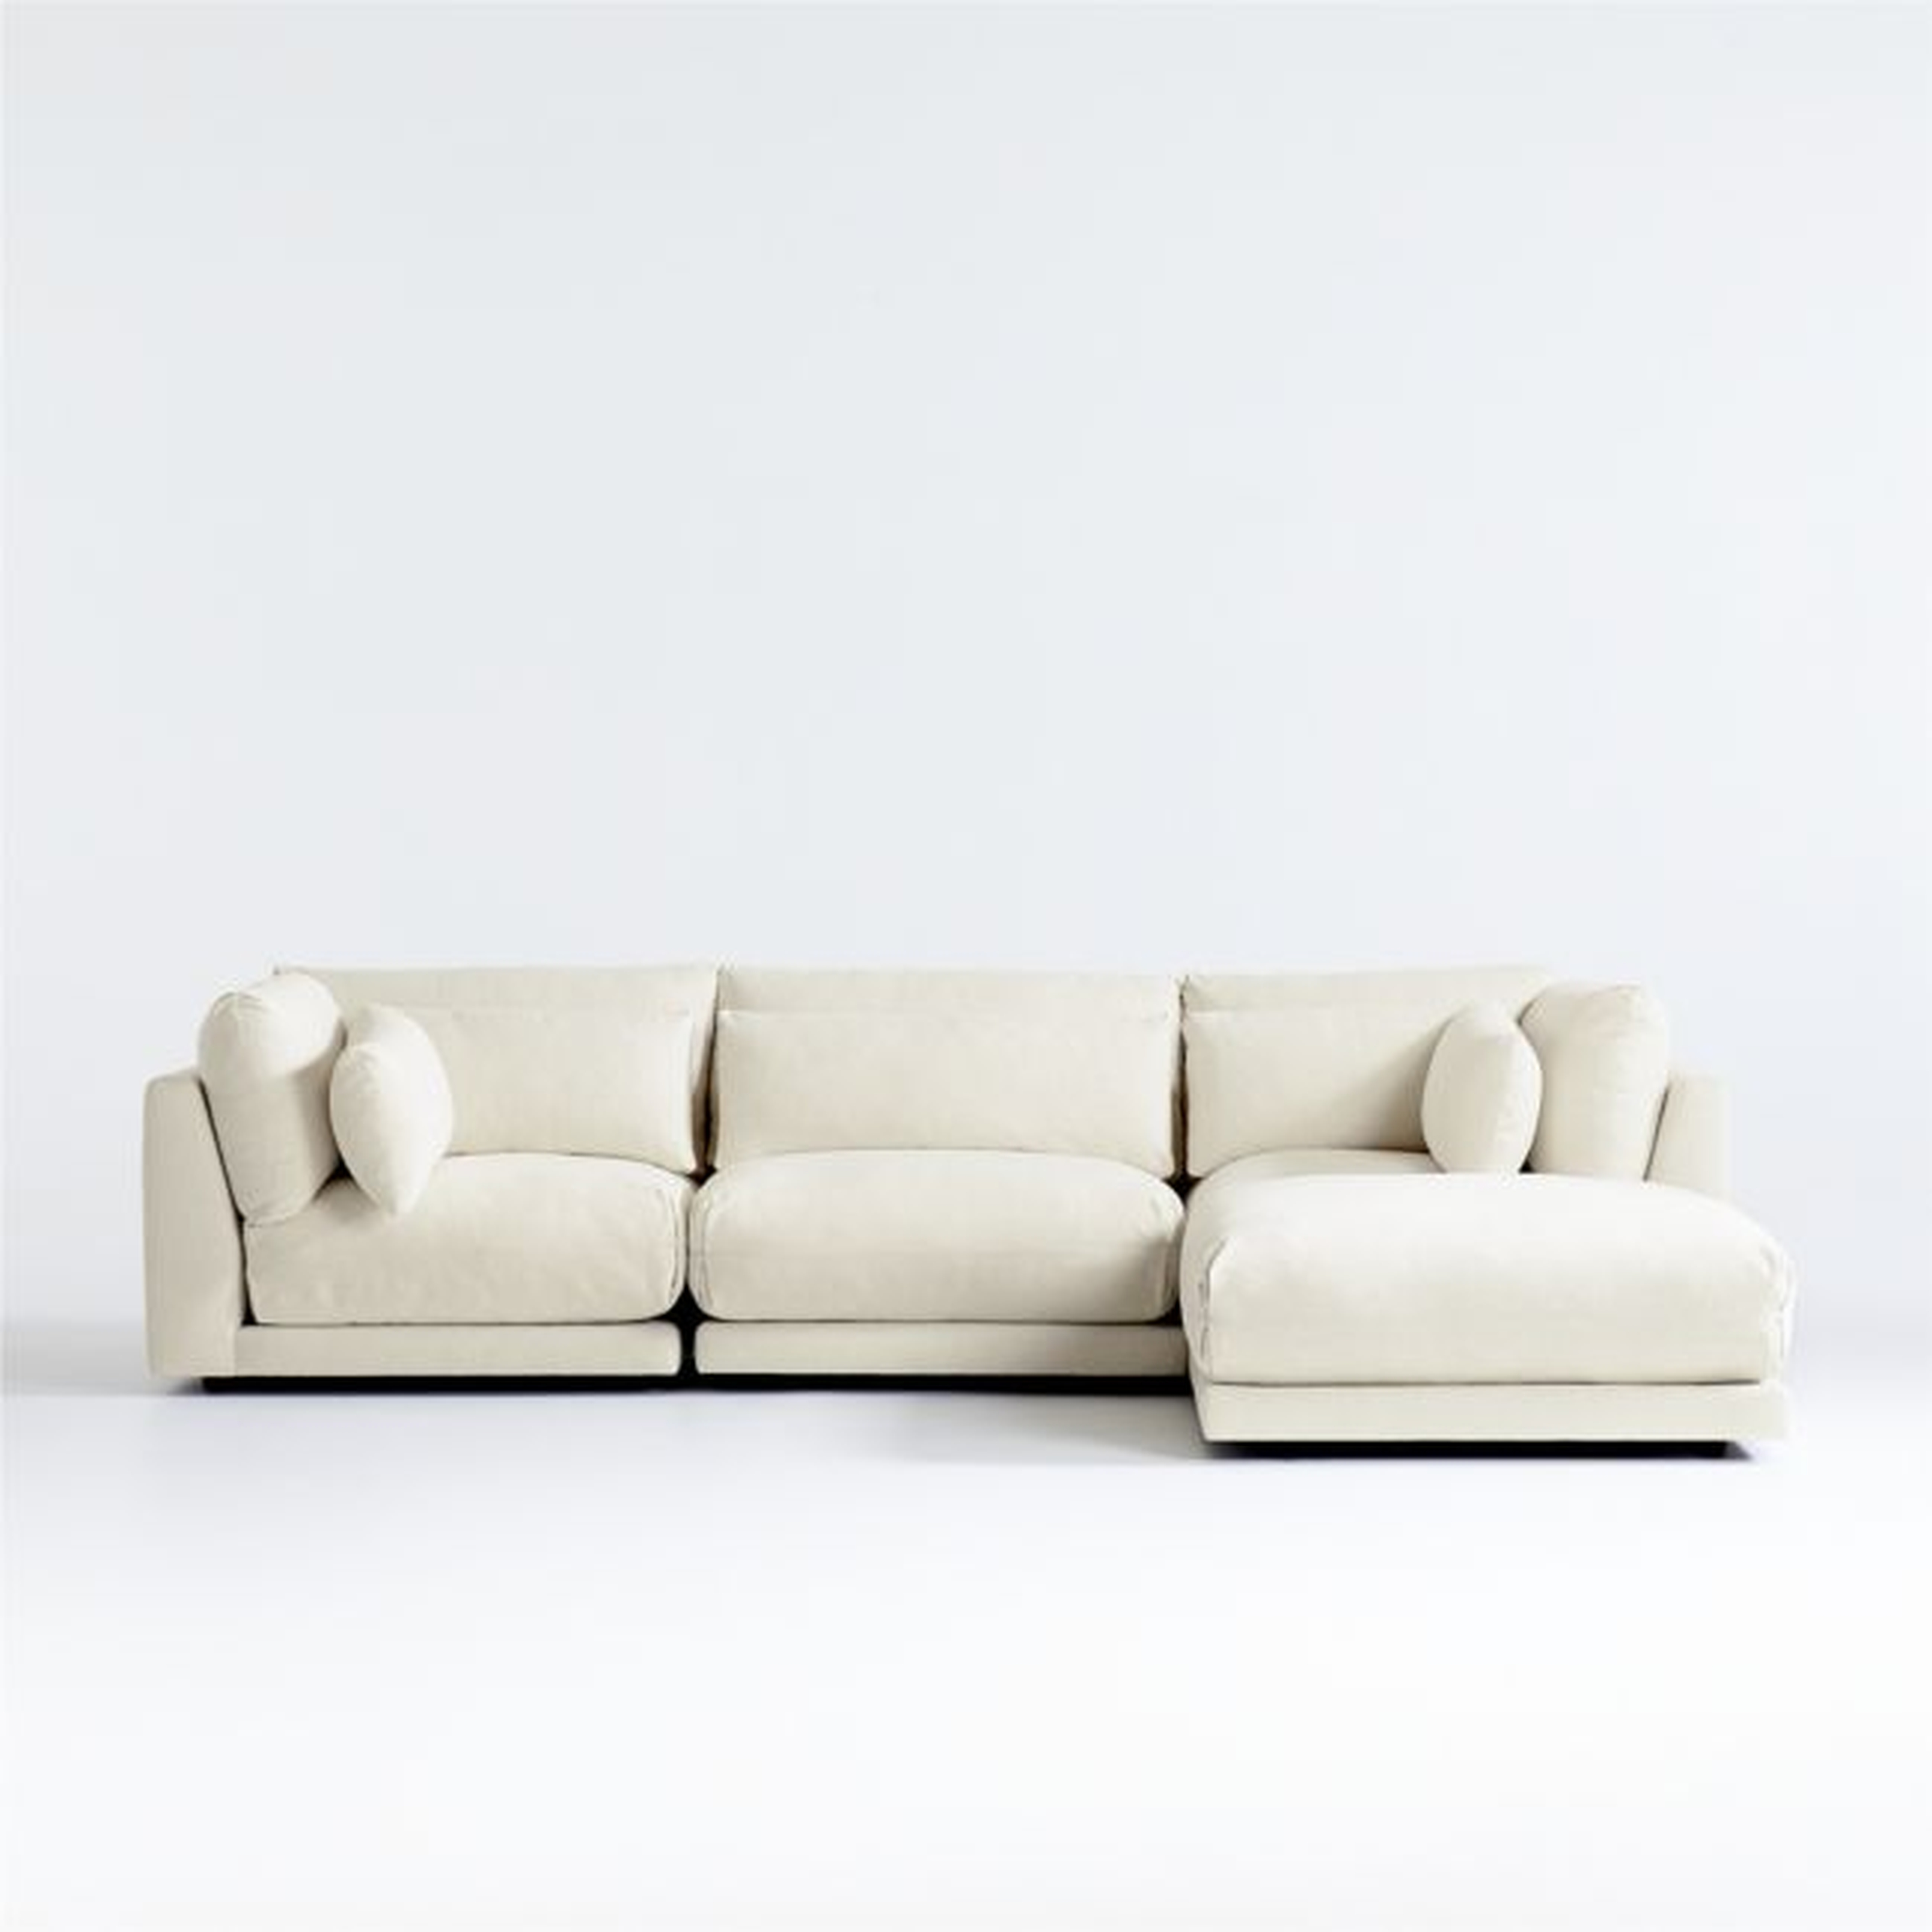 Plush 4-Piece Sectional Sofa - Crate and Barrel